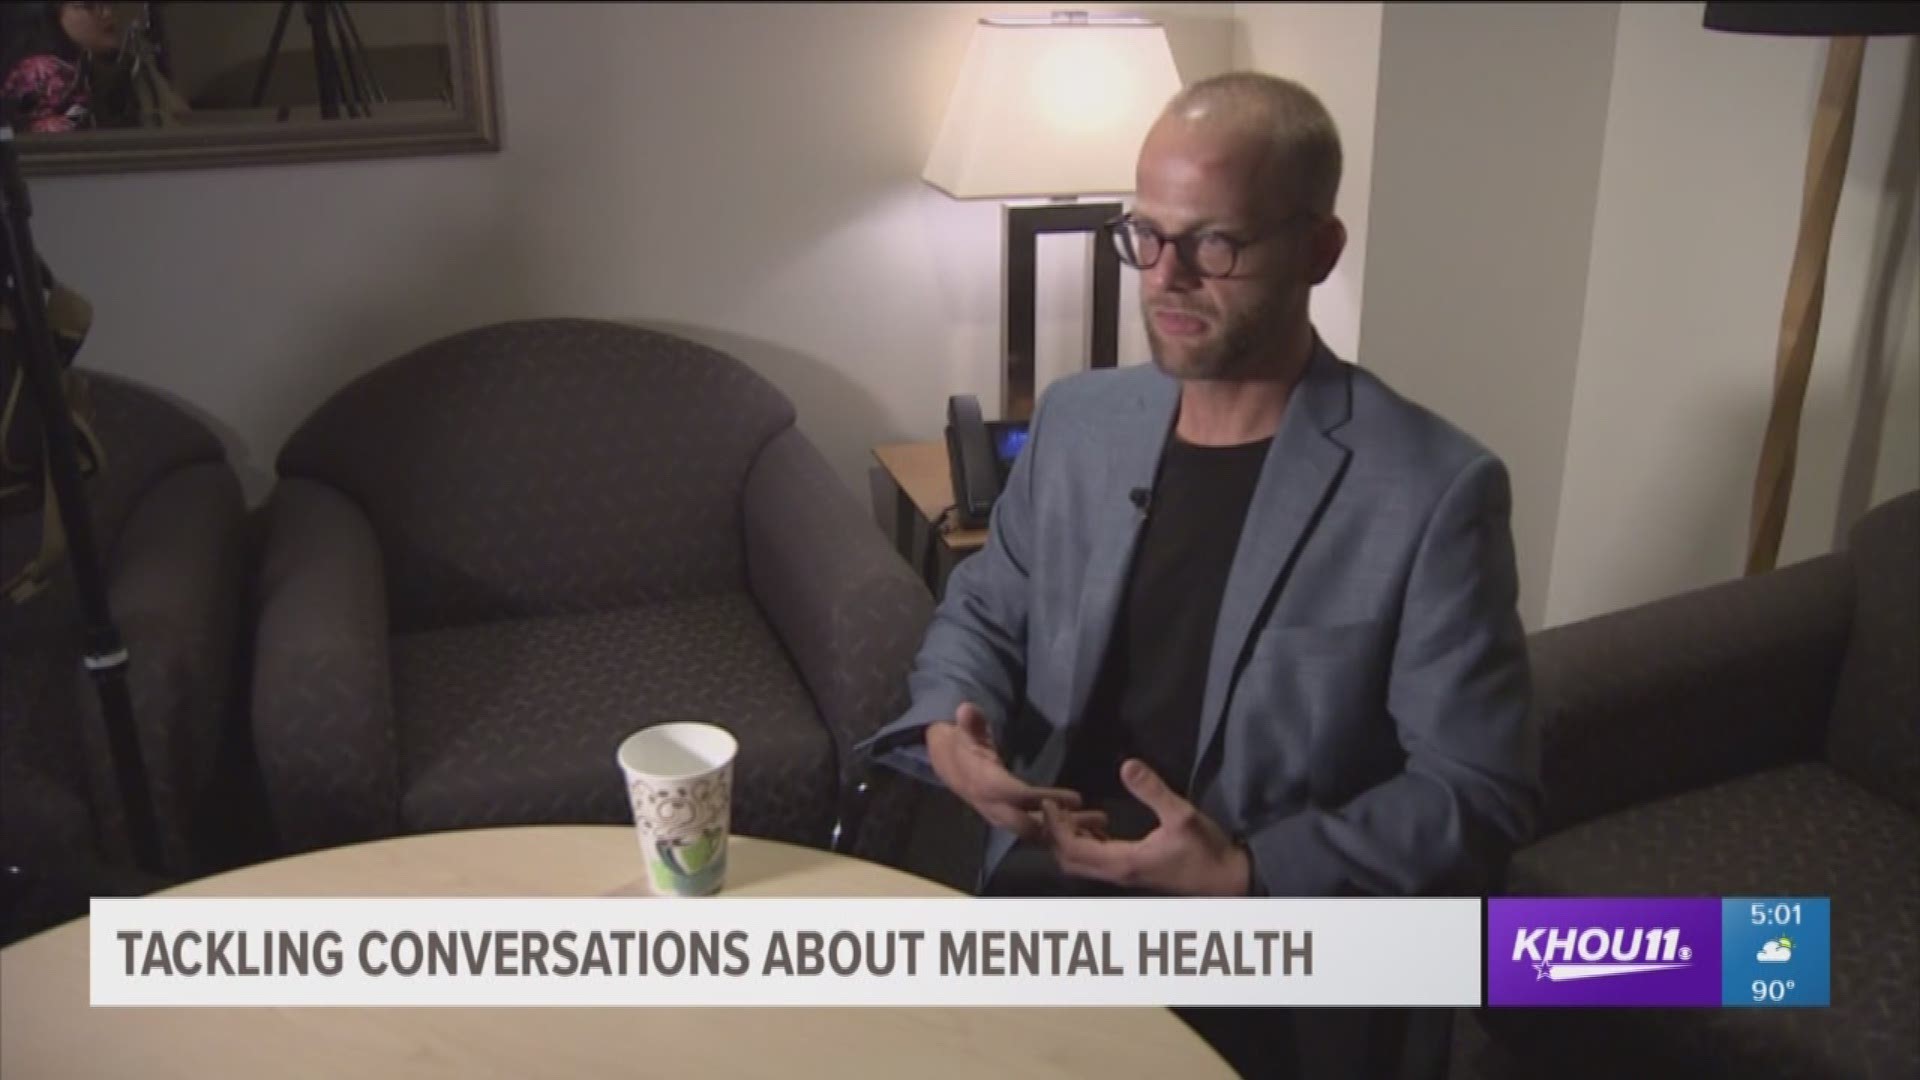 From Hurricane Harvey, to the rebuilding, to deadly school shootings, lockdowns and protests, students in the Houston metro are working through a lot of emotions, says David Head, the Director of Mental Health for Communities in Schools for Houston.